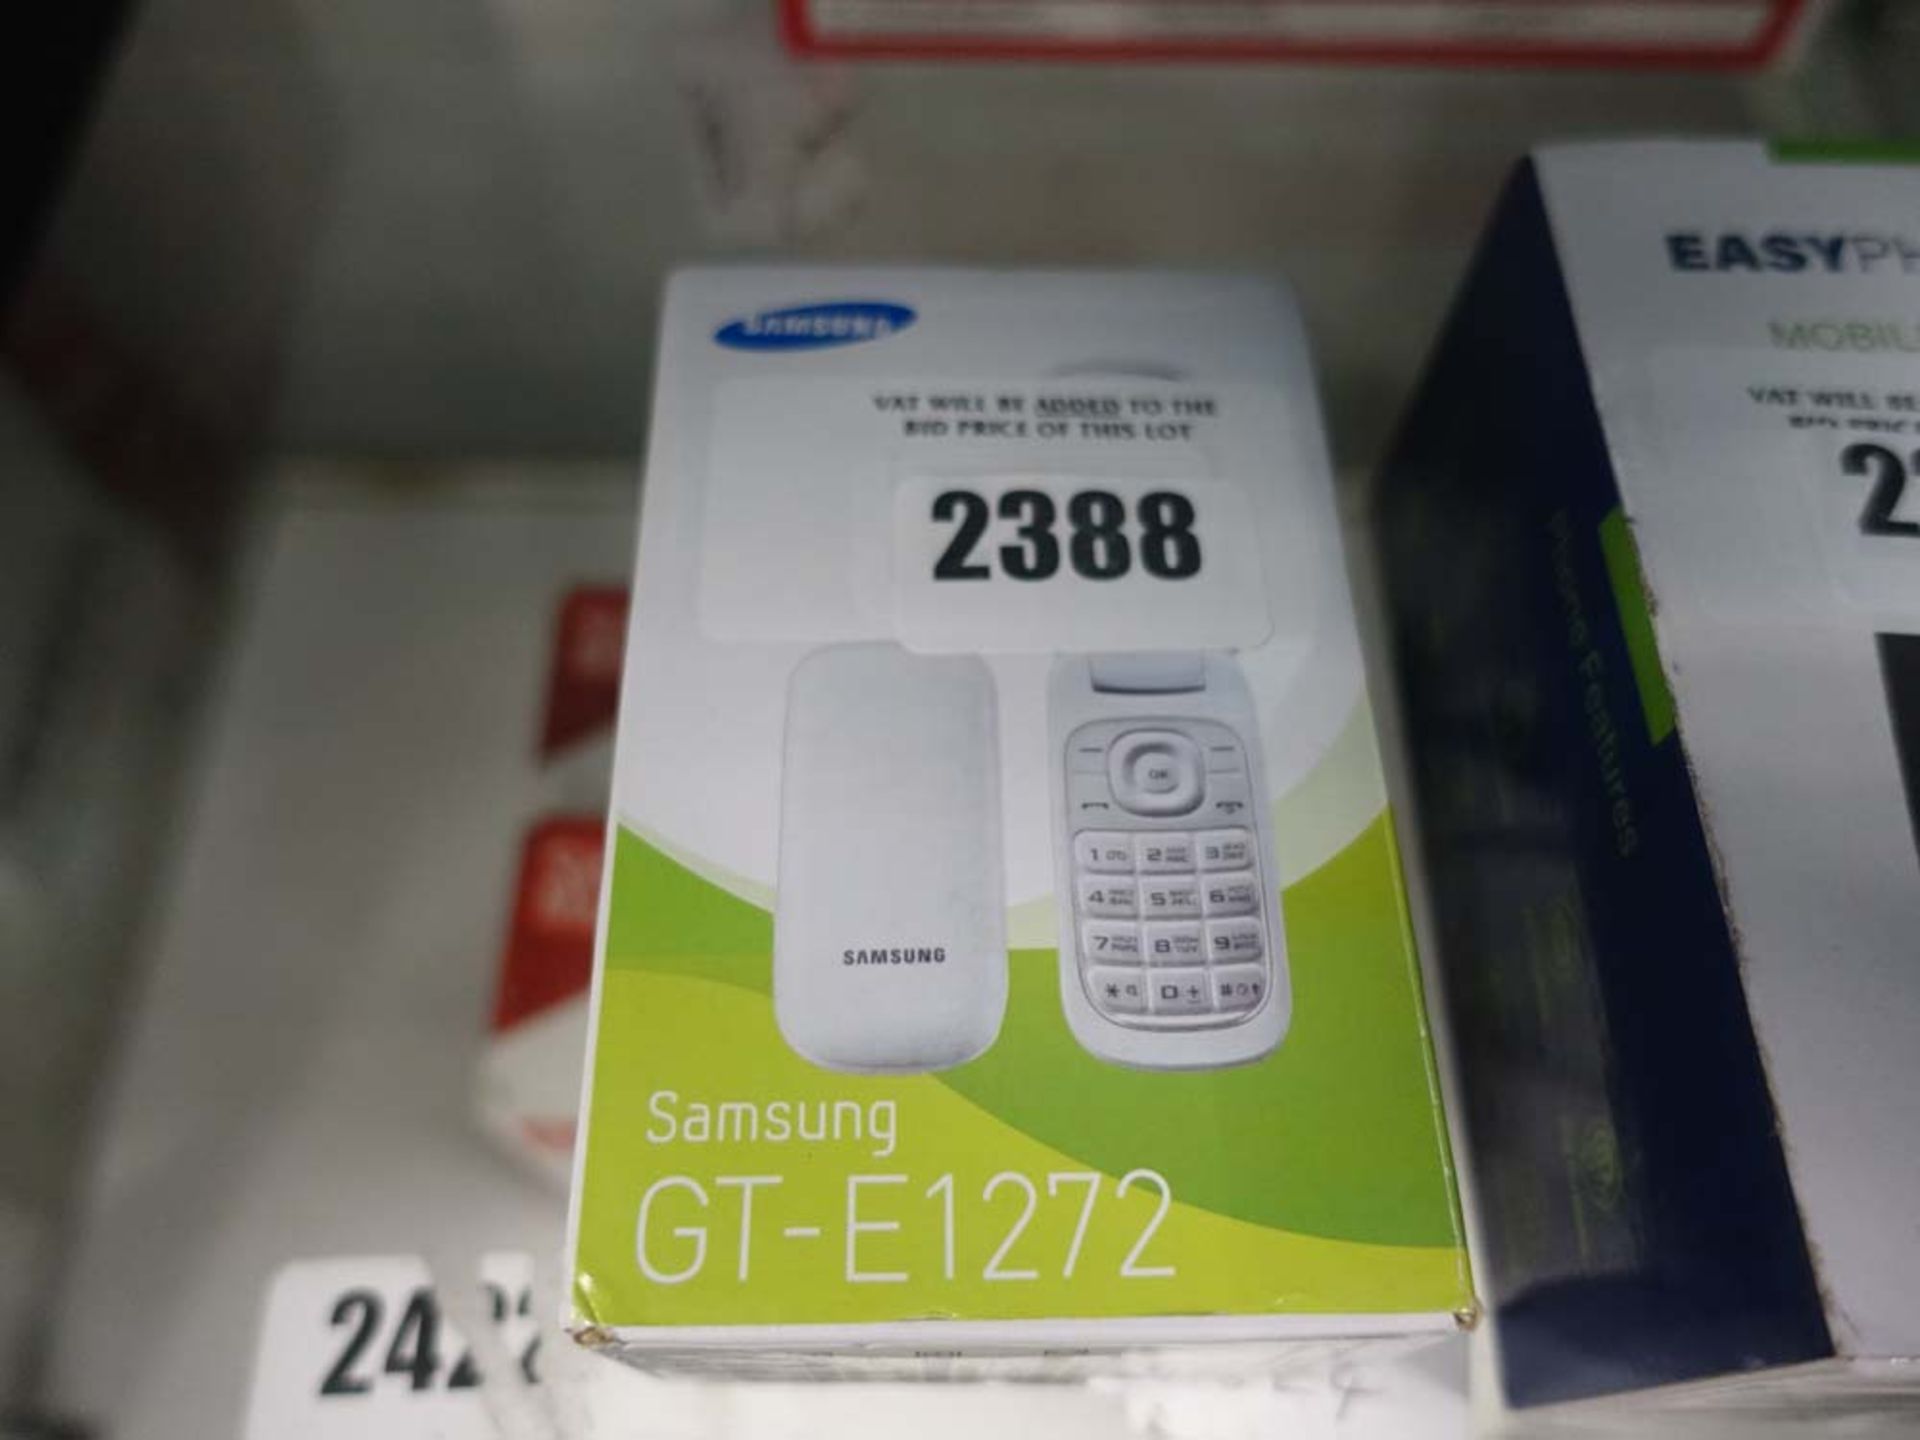 WD 2219 - Samsung GT-E1272 mobile phone with box